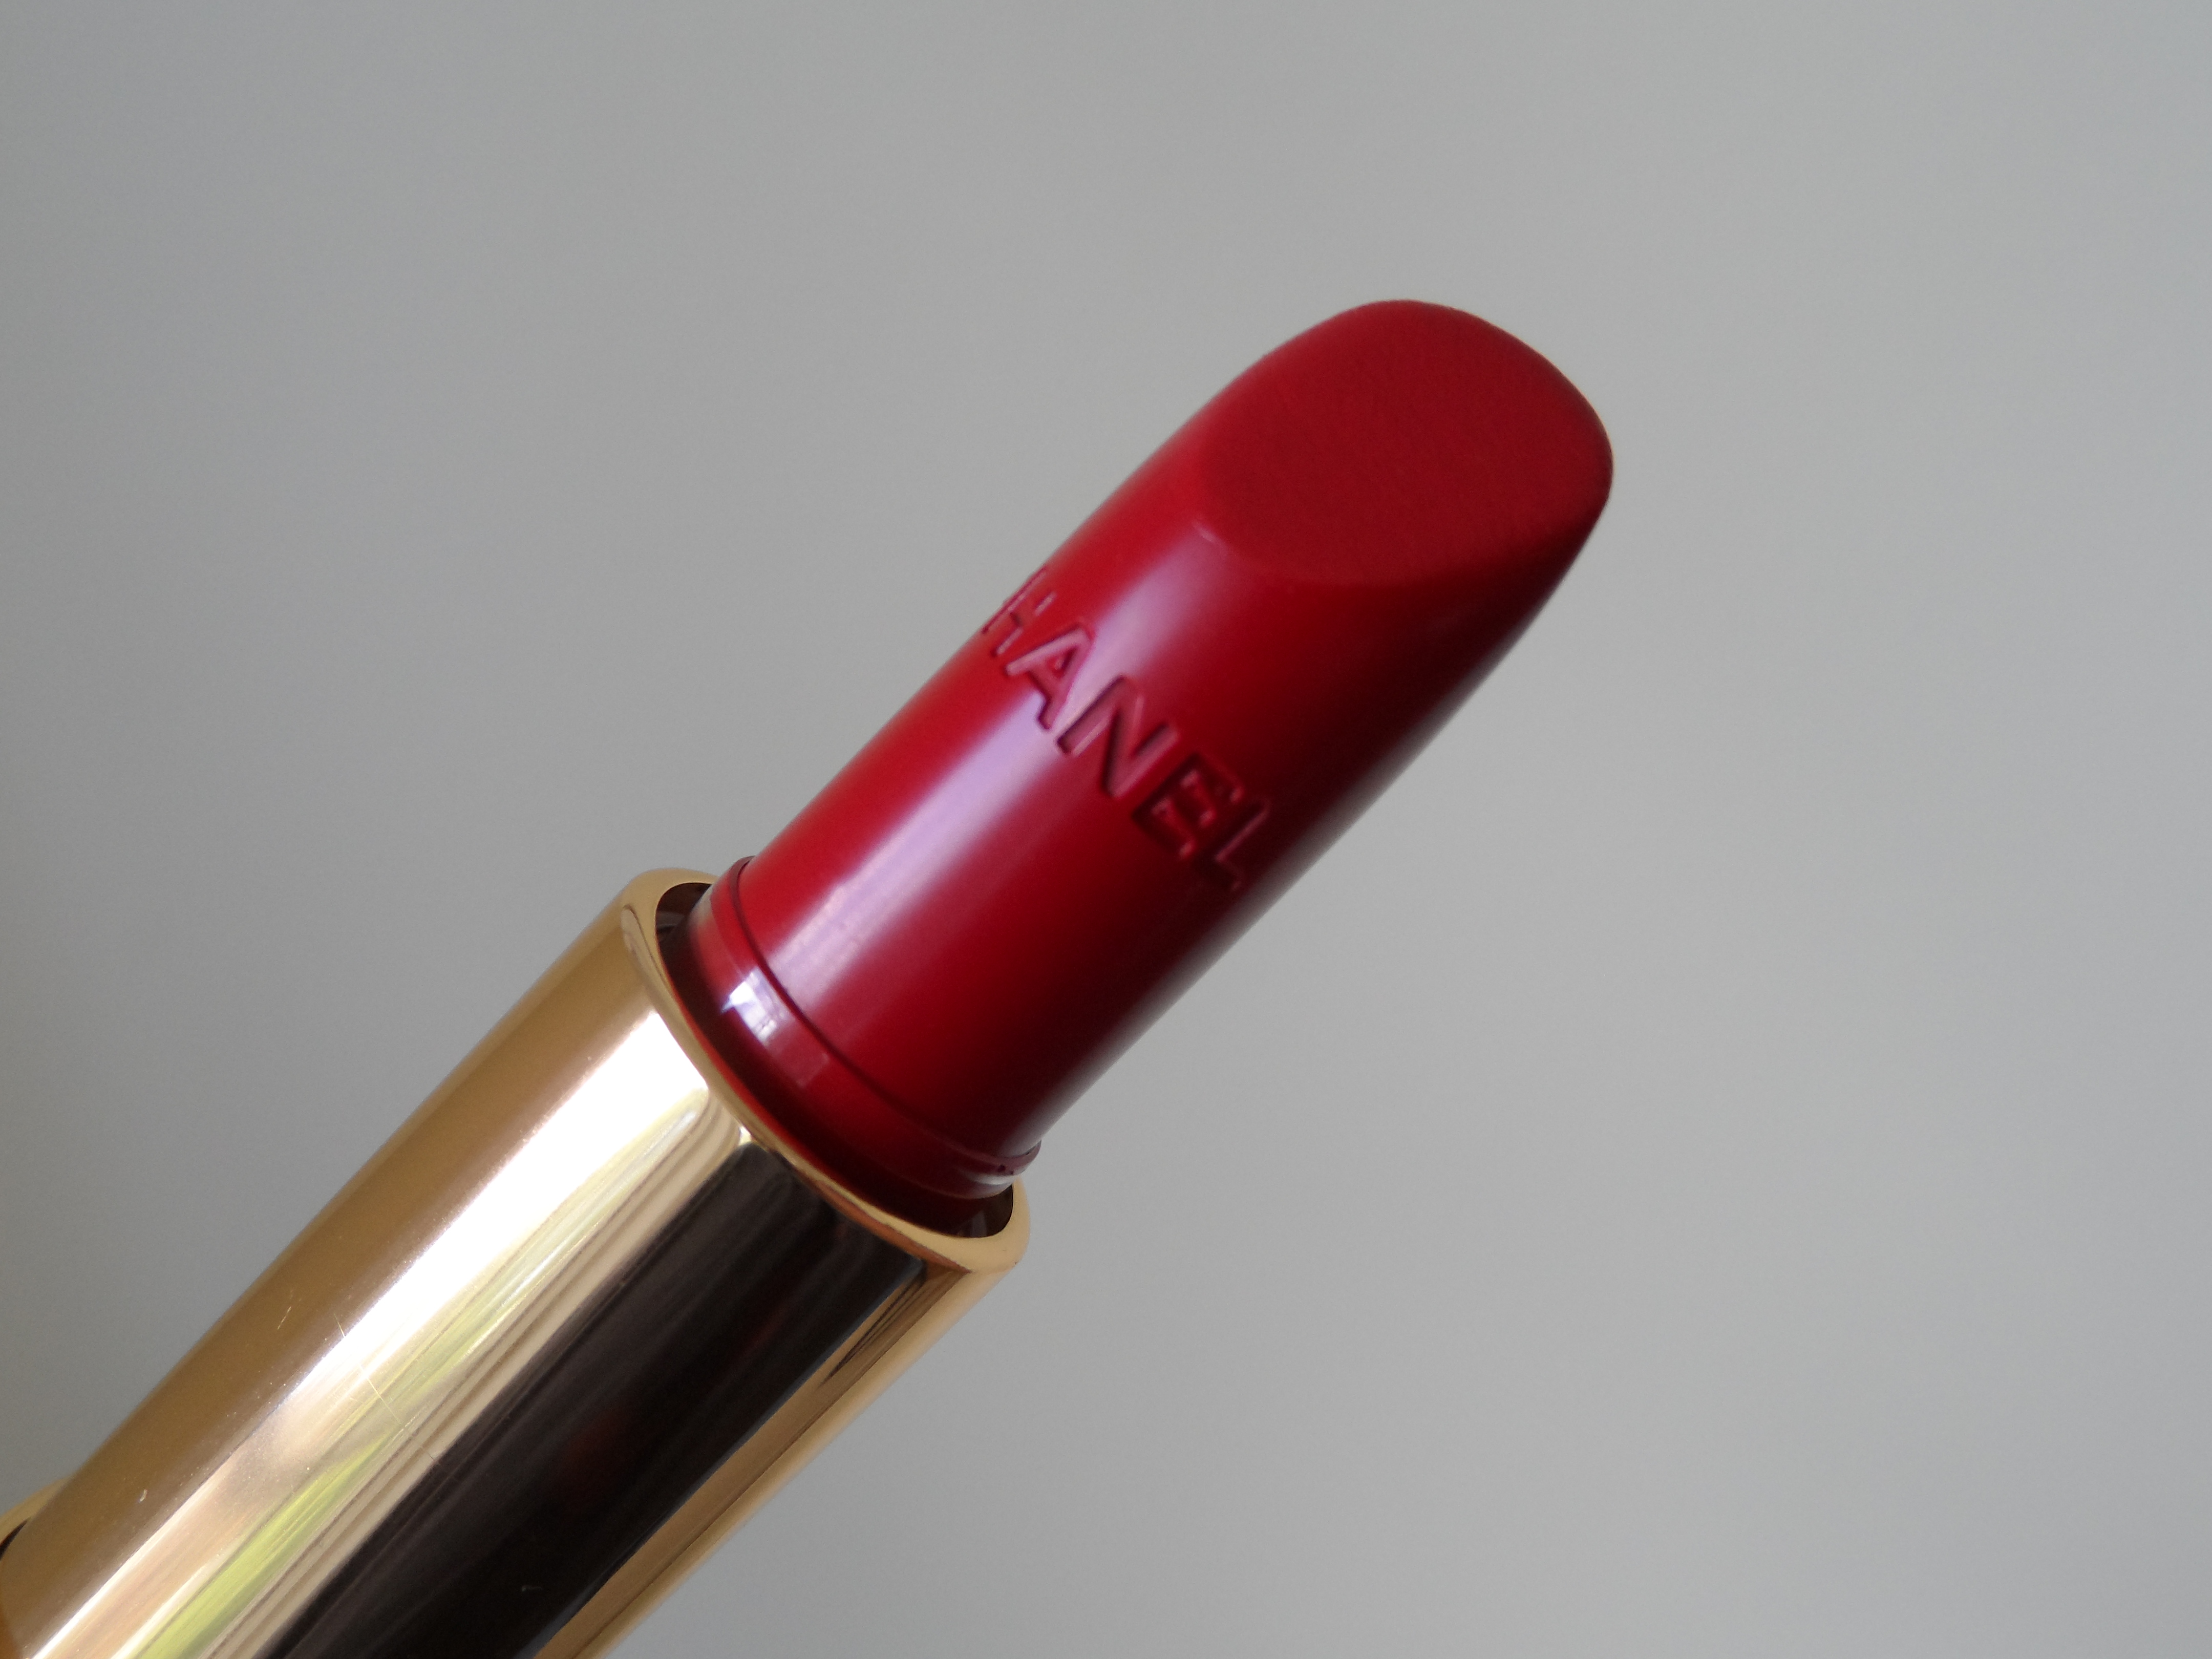 the raeviewer - a premier blog for skin care and cosmetics from an  esthetician's point of view: Chanel Rouge Allure Luminous Intense Lip Color  [New/Reformulated] Lipstick Swatches + Review